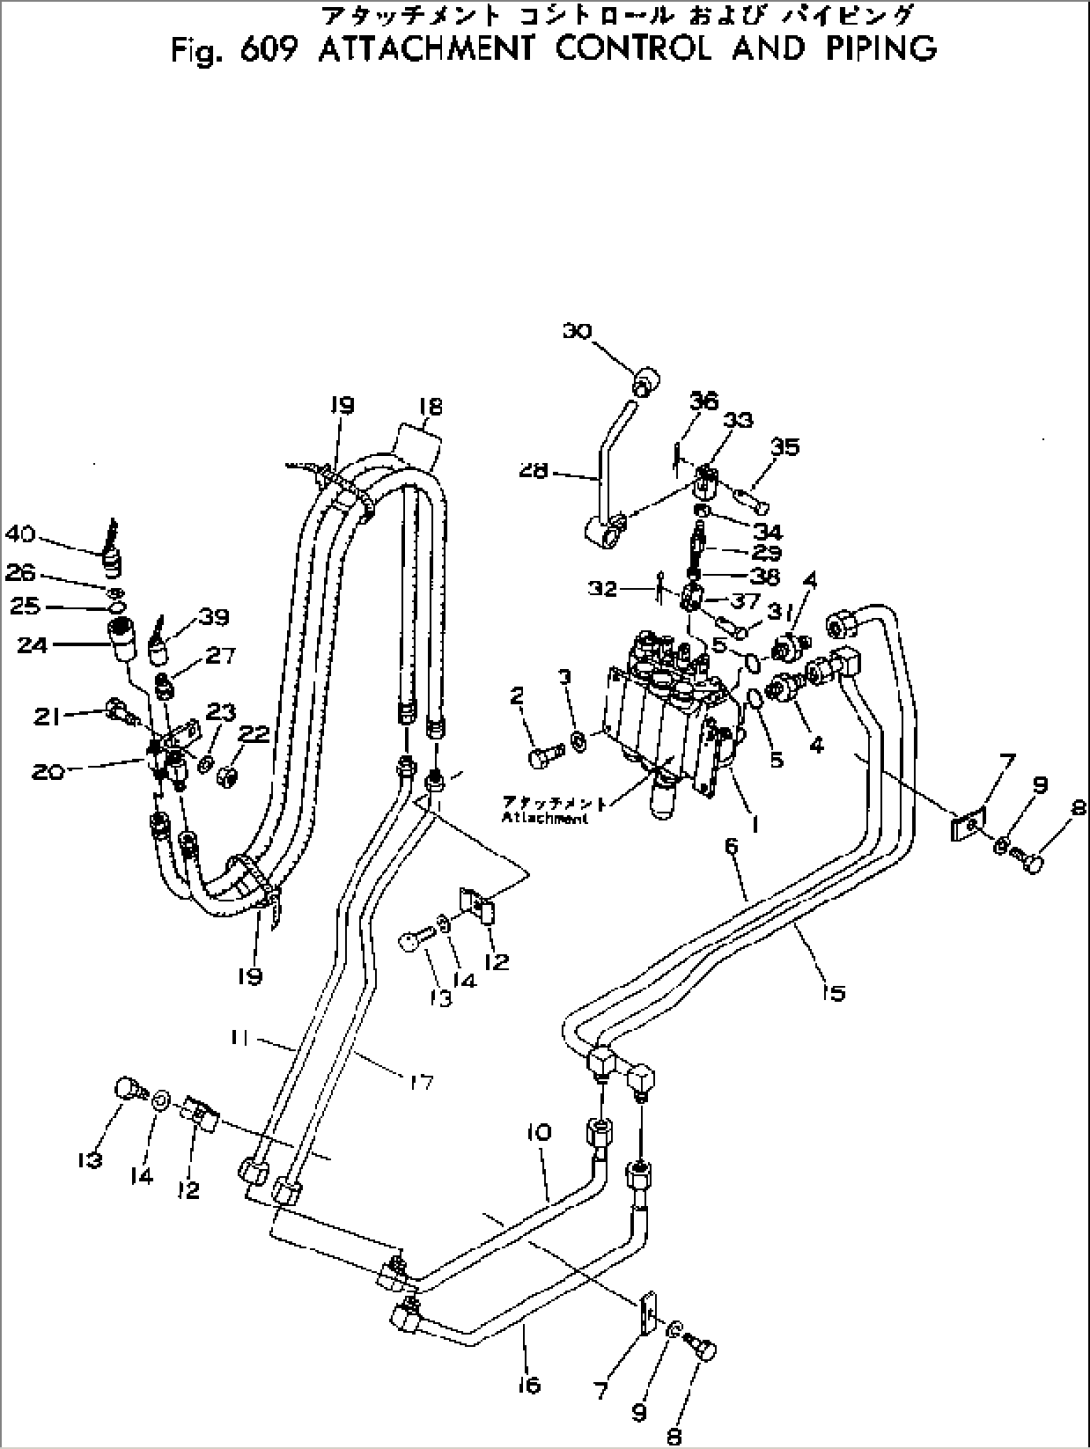 ATTACHMENT CONTROL AND PIPING